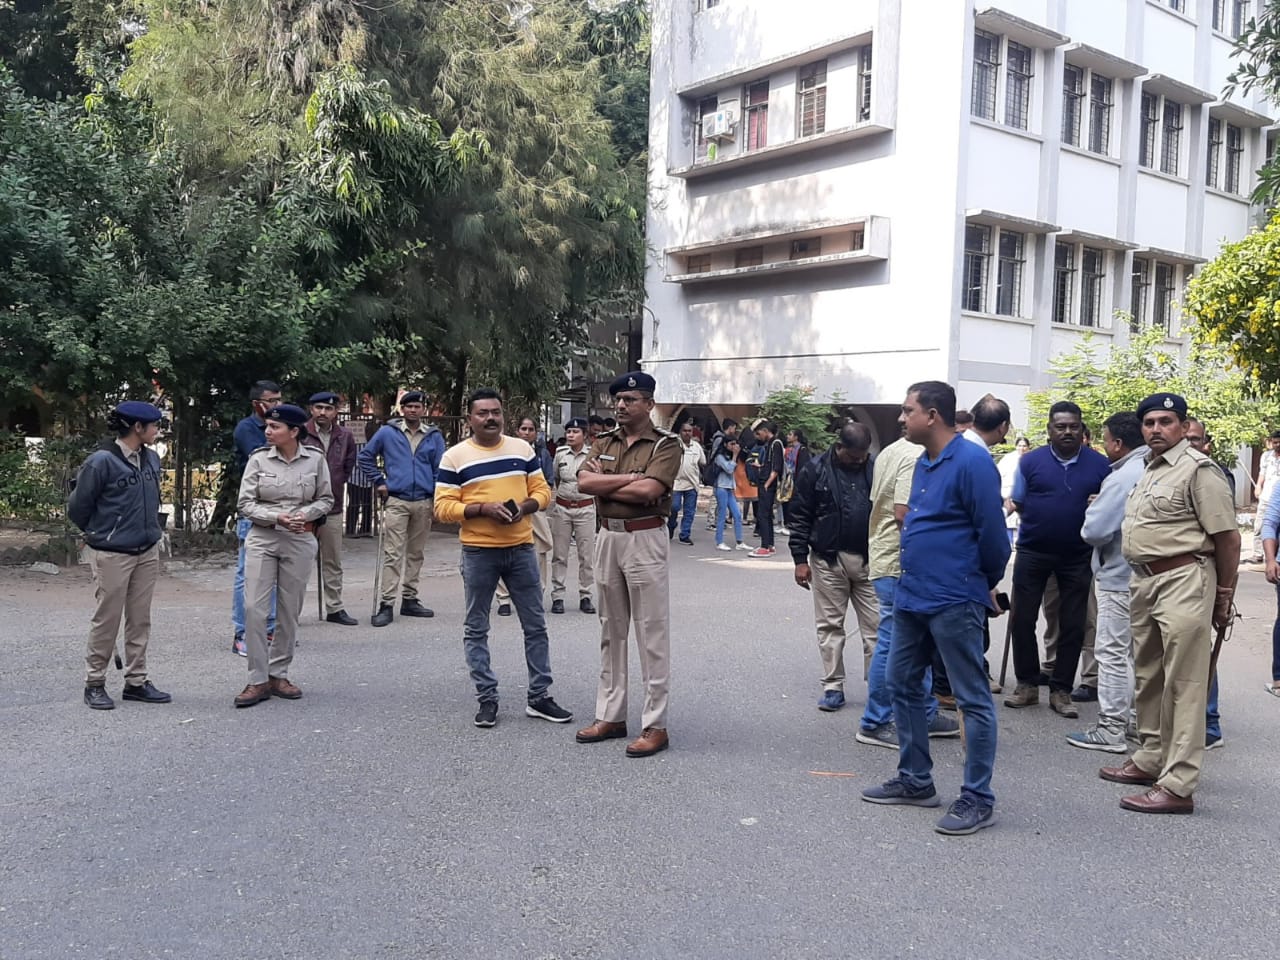 Strict police kept inside MSU after the incident of CAB protest by Fine Arts students